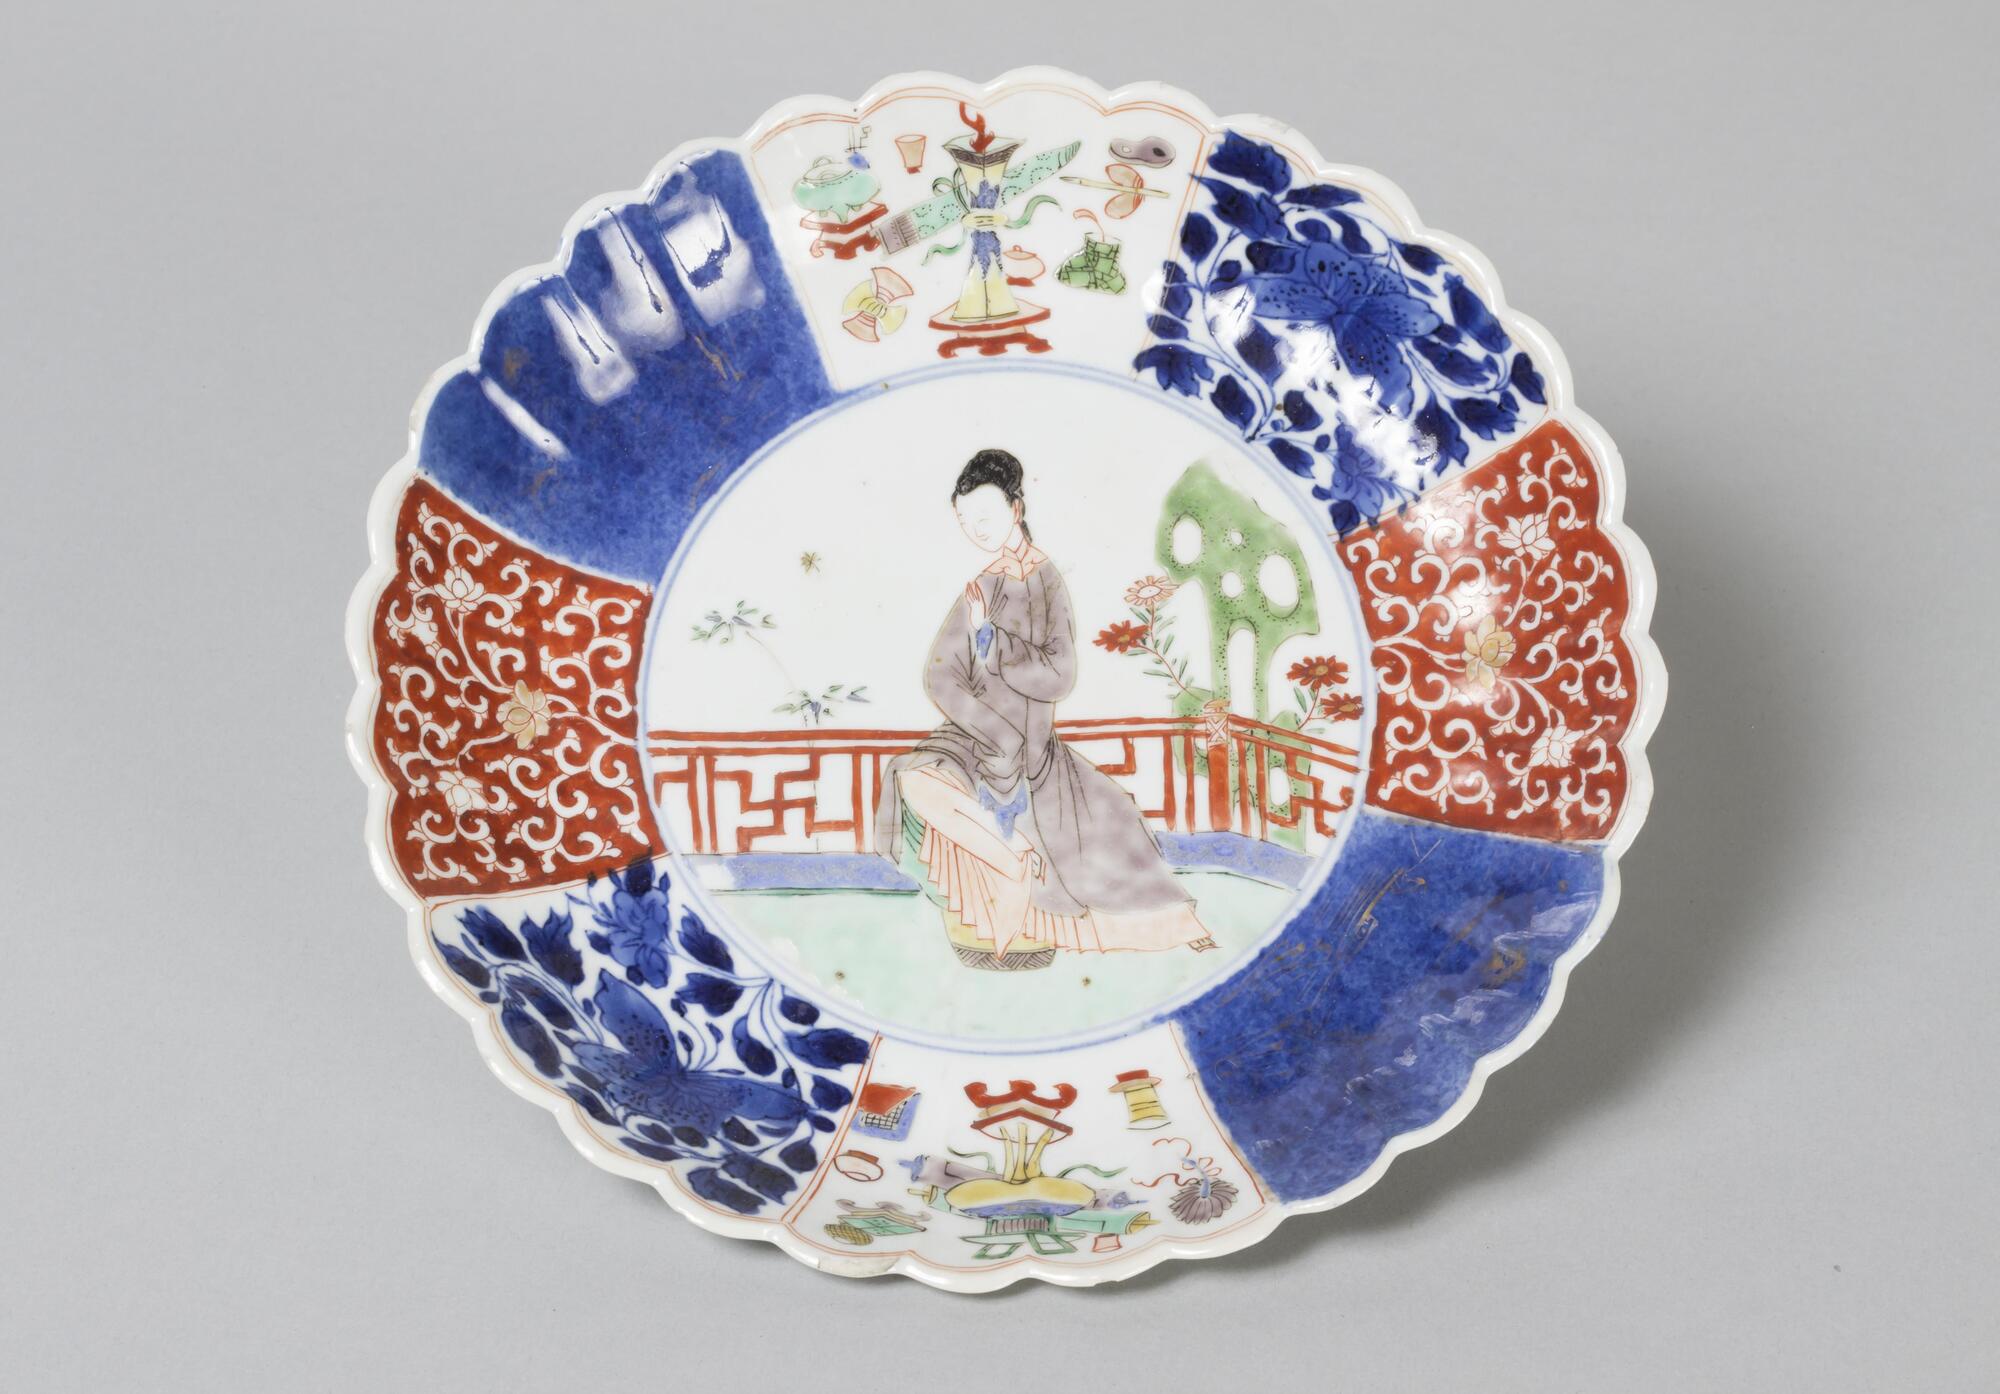 A scalloped plate with design of a lady in the center, wearing a grey dress in a garden.